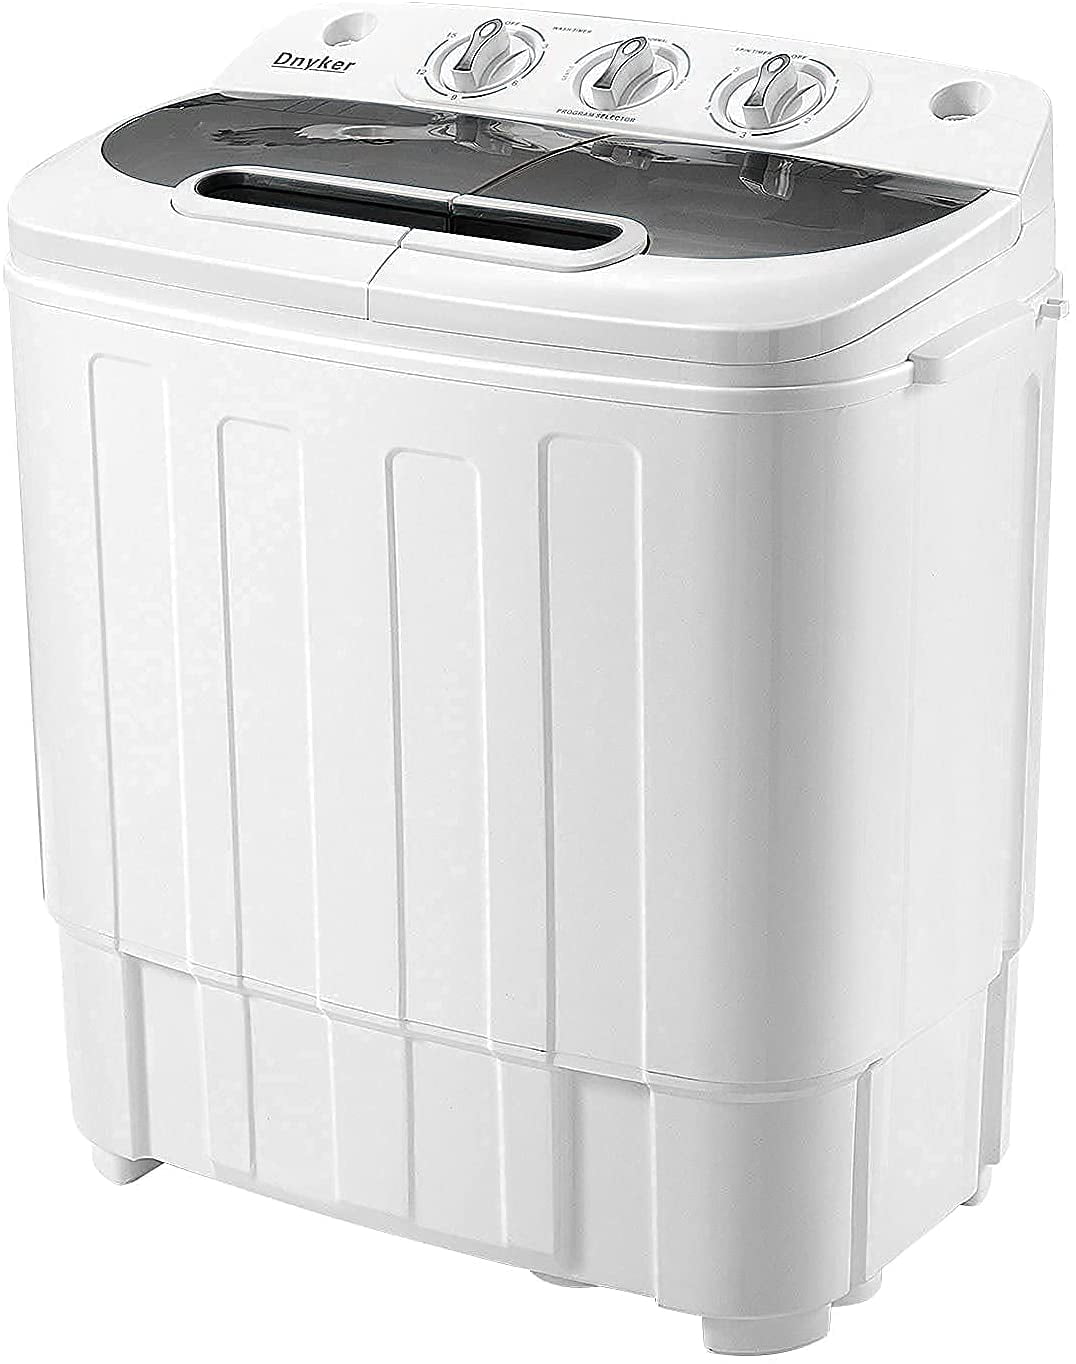 NEW TWIN TUB PORTABLE 230V WASHING MACHINE OUTDOOR GARDEN CAMPING SPIN DRYER 3.6 